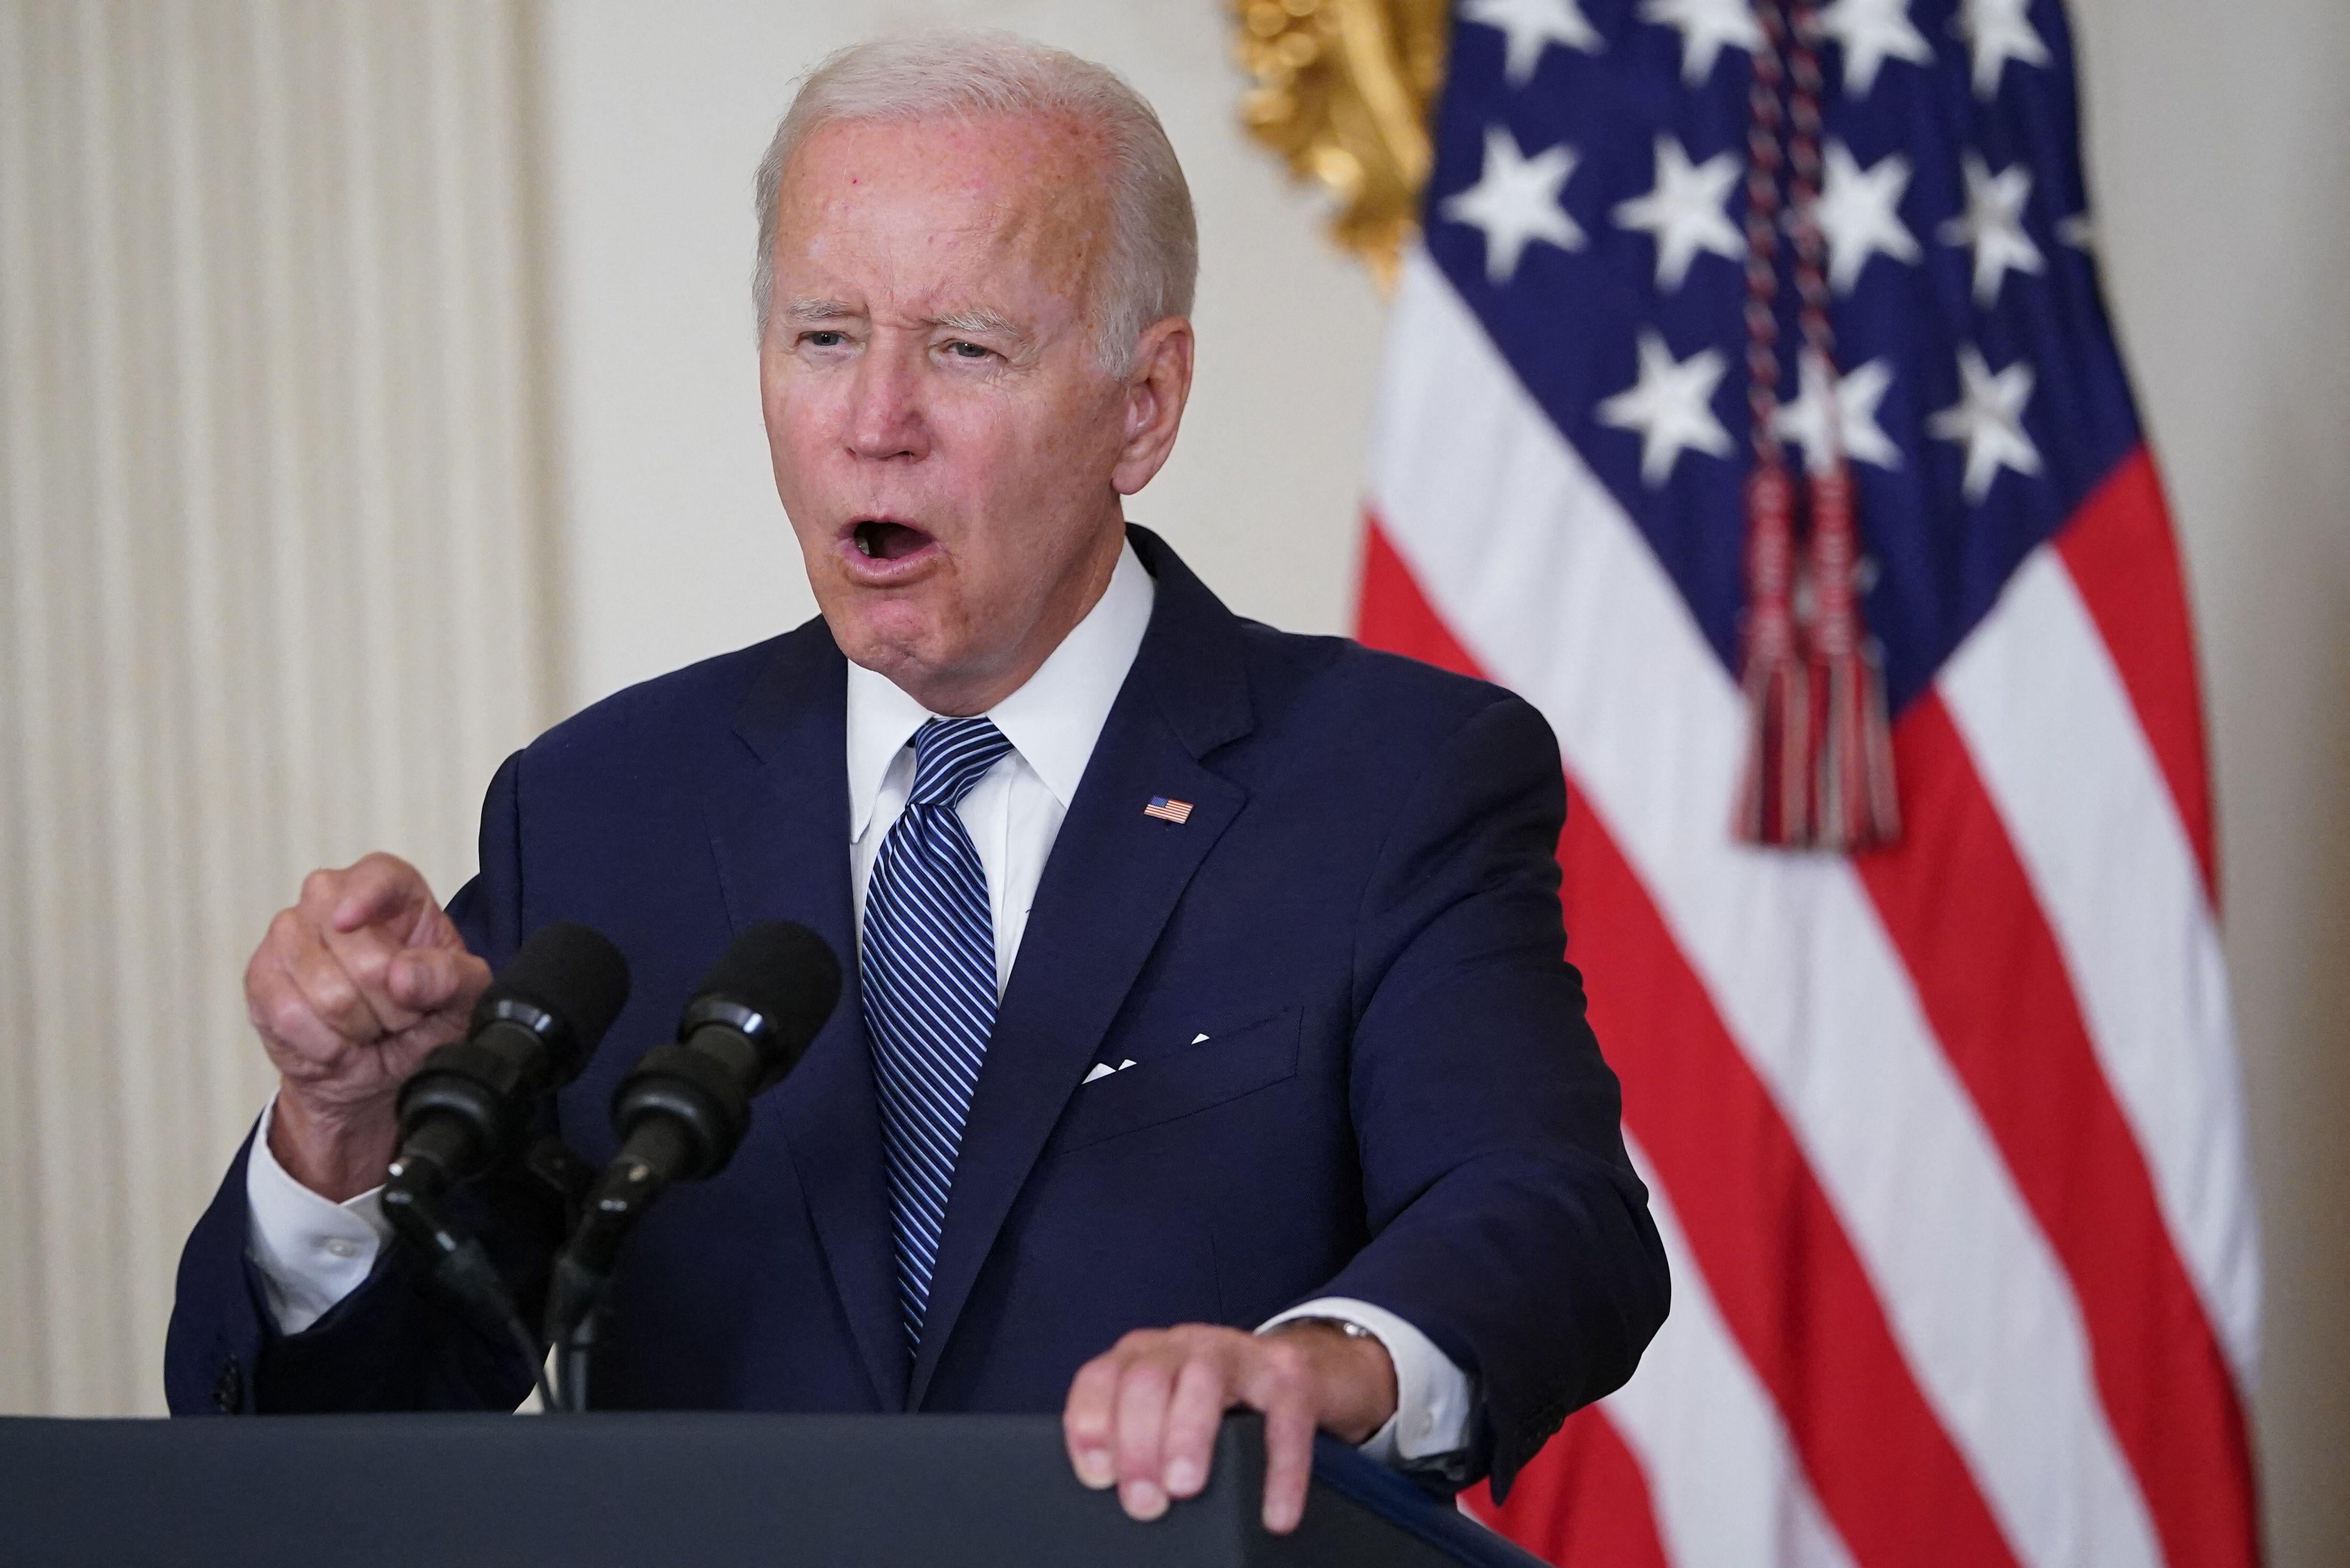 Biden shouting and pointing his finger.